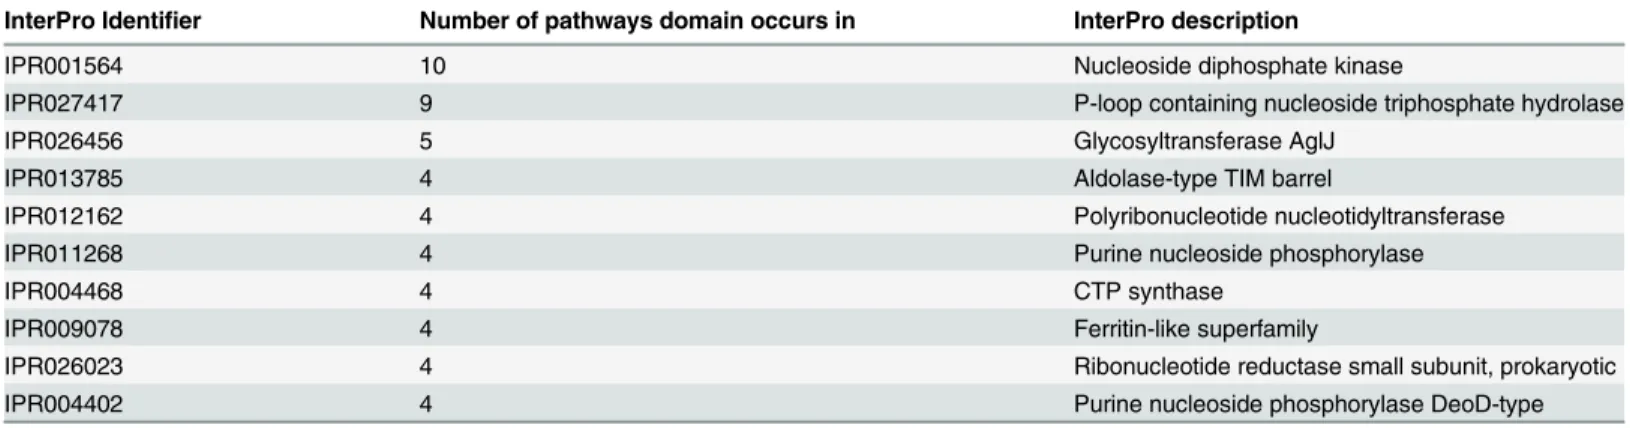 Table 3. Top 10 more promiscuous domains with respect to the number of different metabolic pathways they appear in.